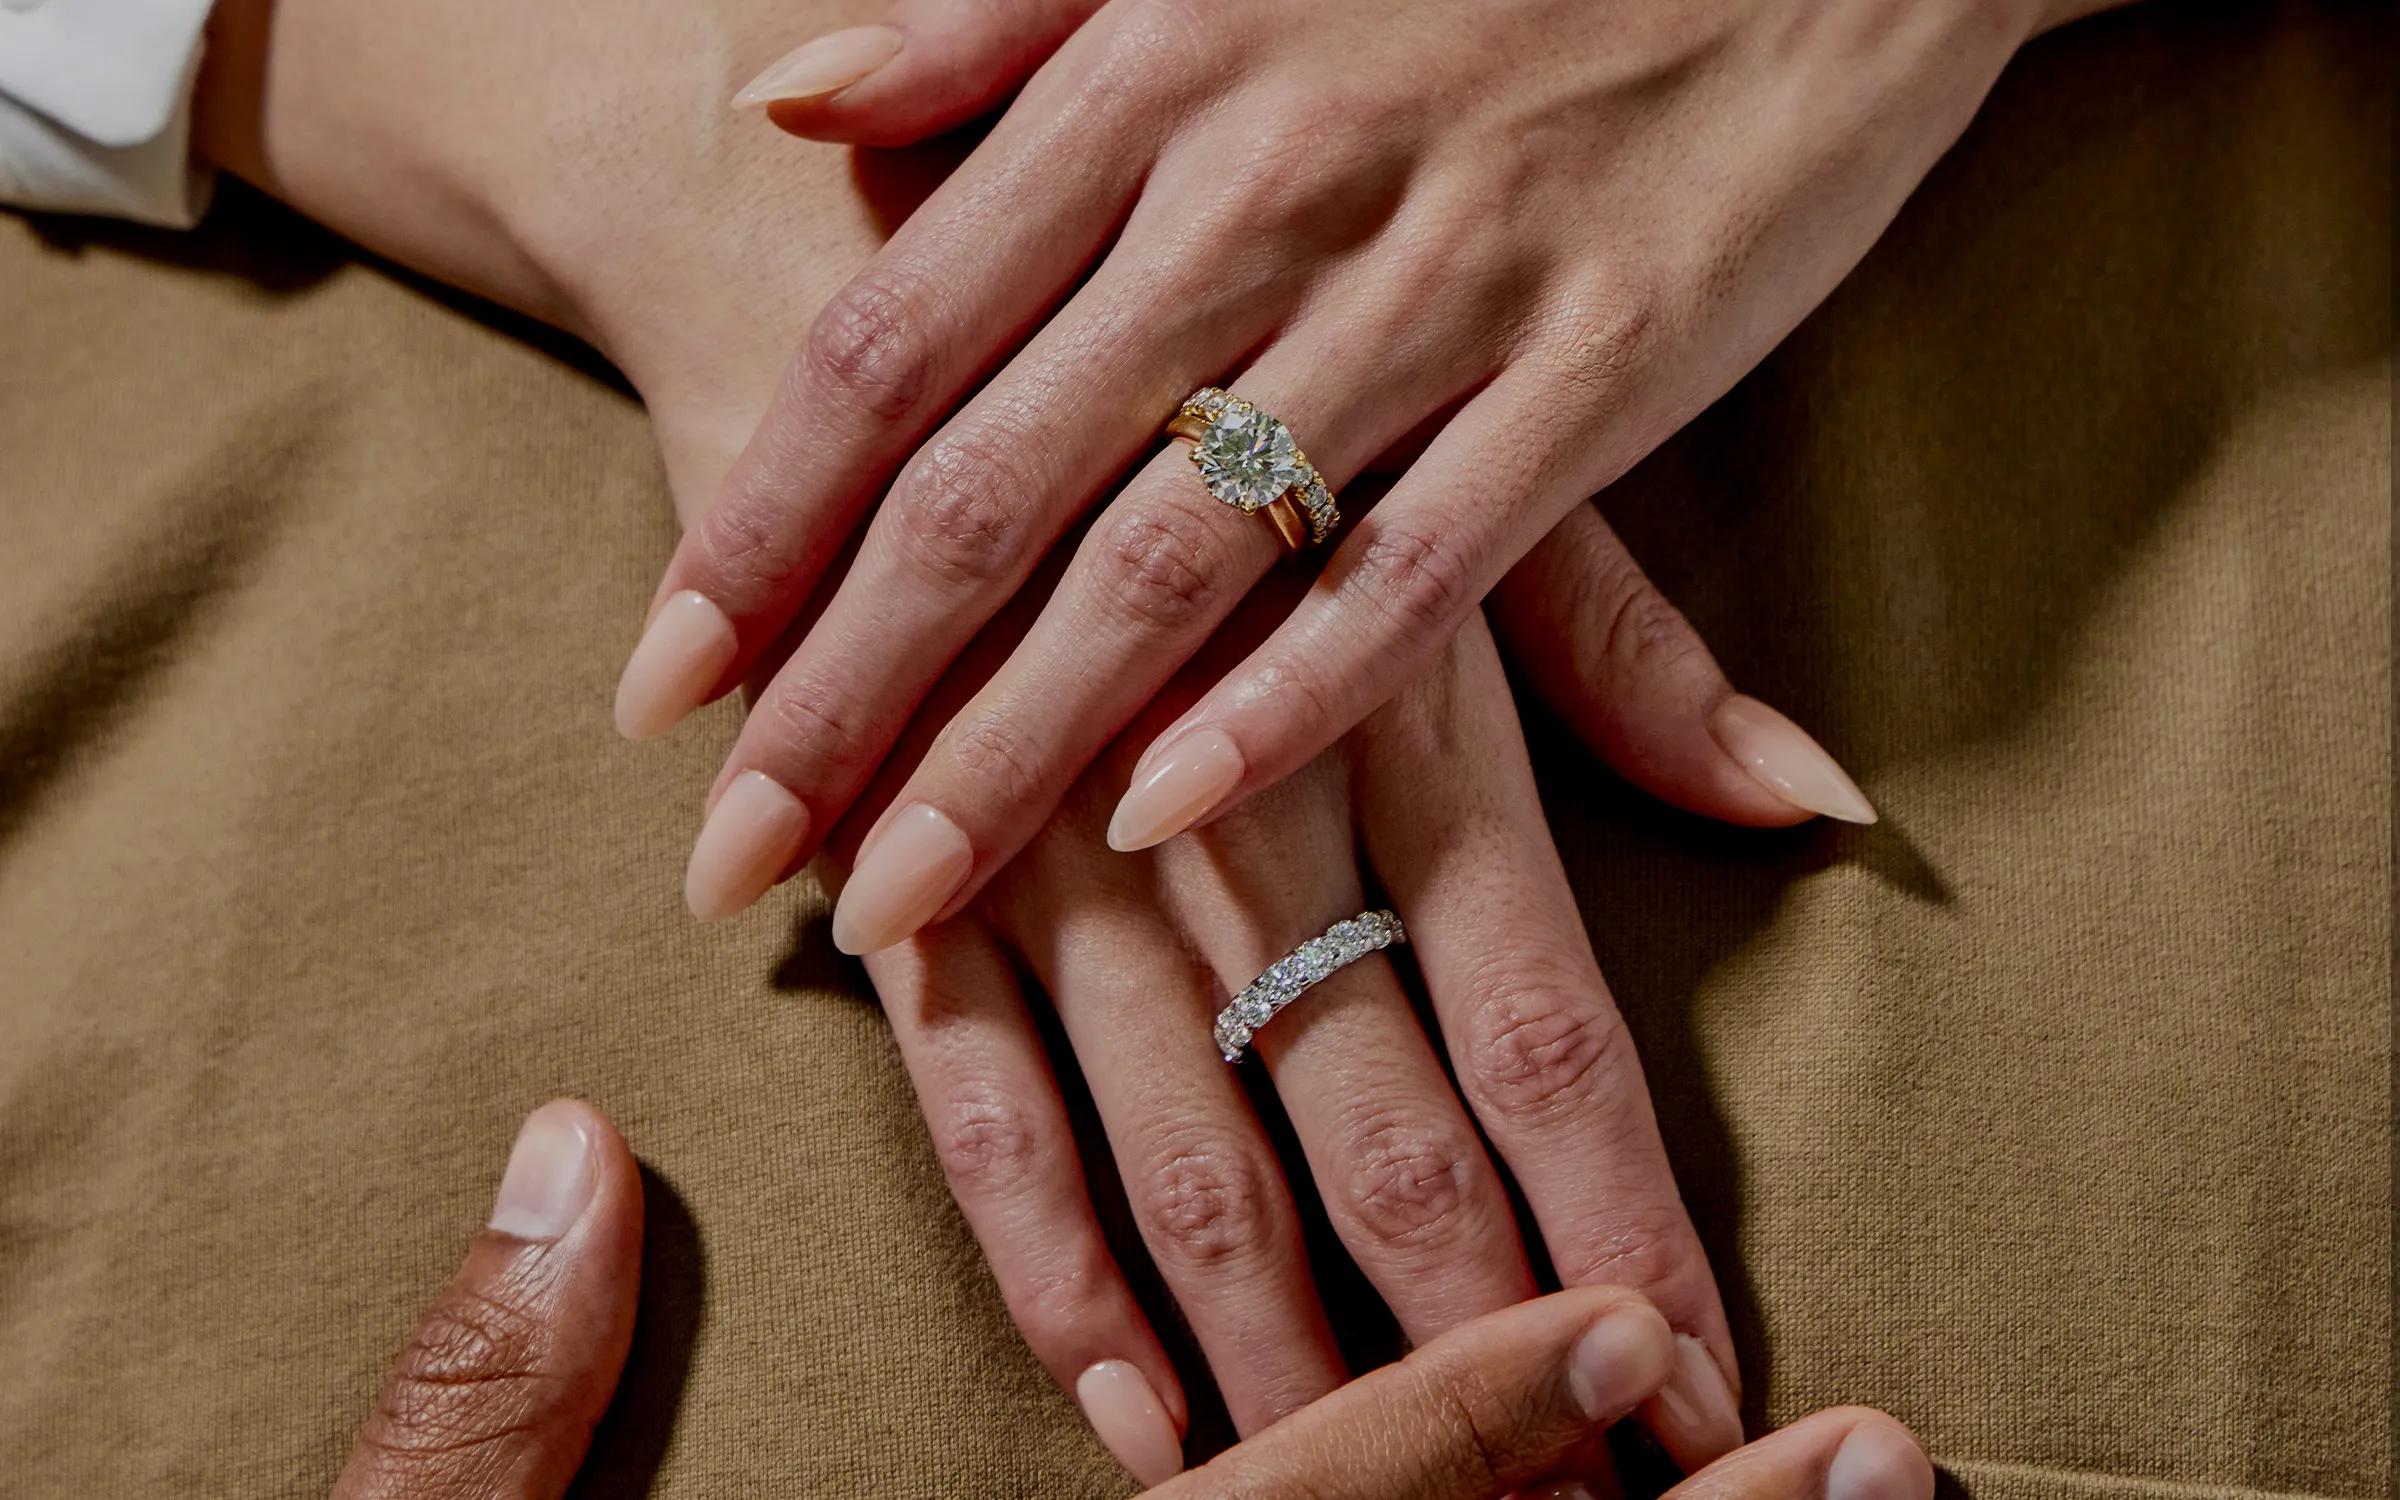 Two hands showing an engagement ring and a wedding band